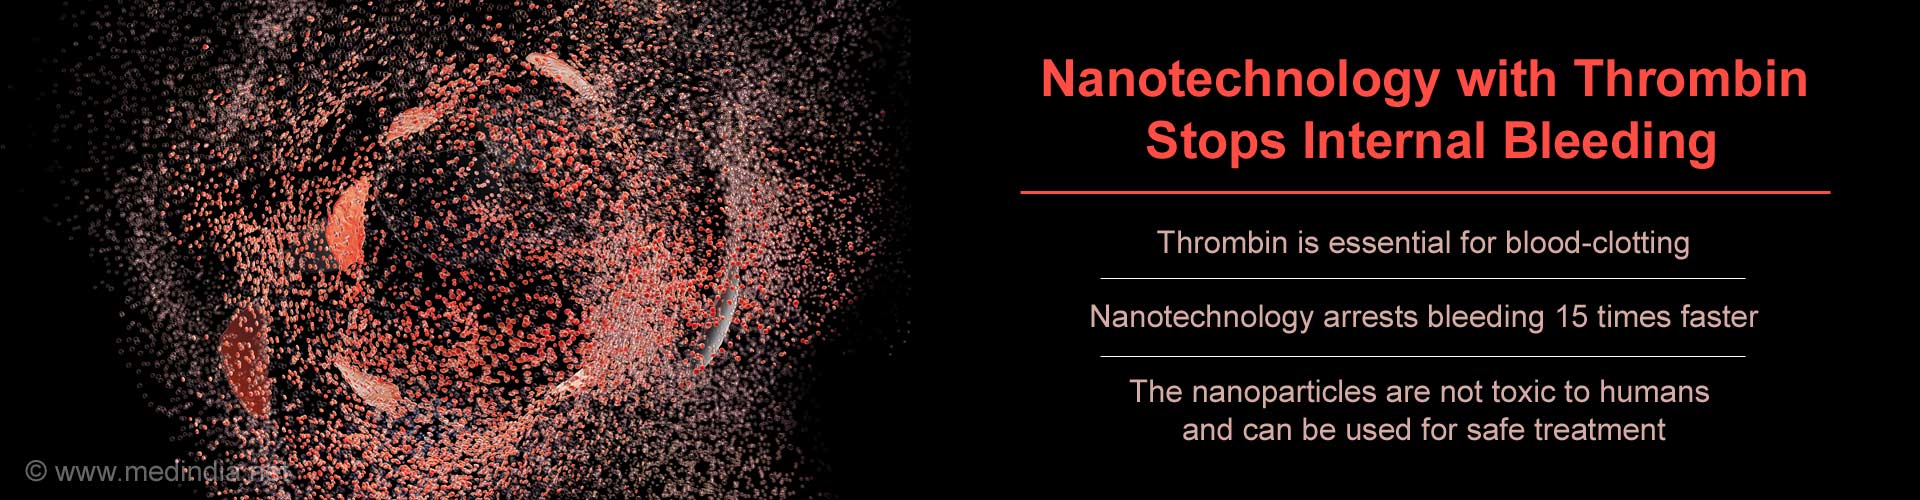 nanotechnology with thrombin stops internal bleeding
- thrombin is essential for blood-clotting
- nanotechnology arrests bleeding 15 times faster
- the nanoparticles are not toxic to humans and can be used for safe treatment
